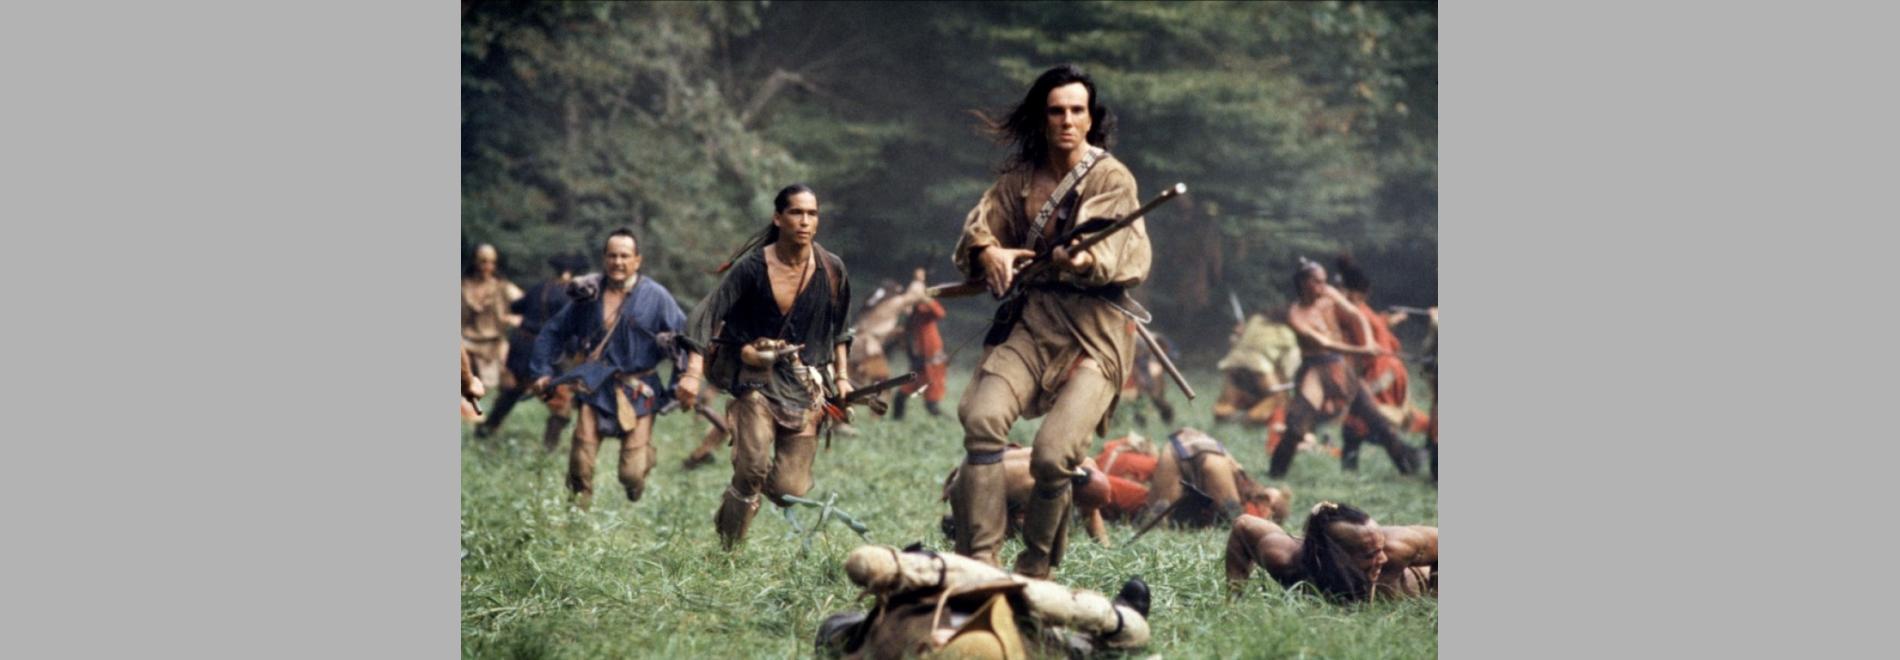 The Last of the Mohicans 